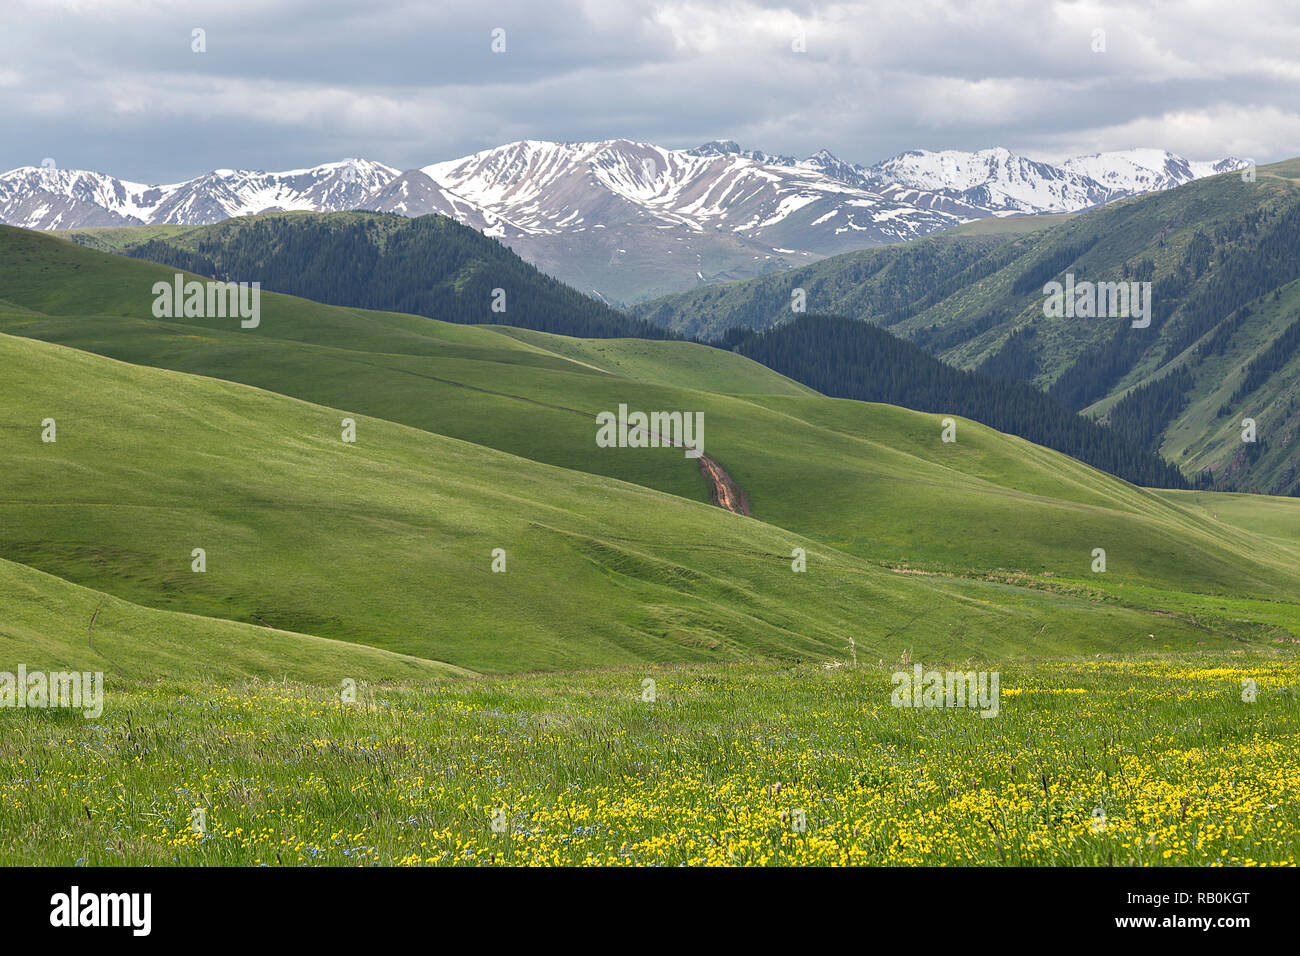 Assy Plateau where the nomadic people go in the summer, near the city of Almaty, Kazakhstan. Stock Photo